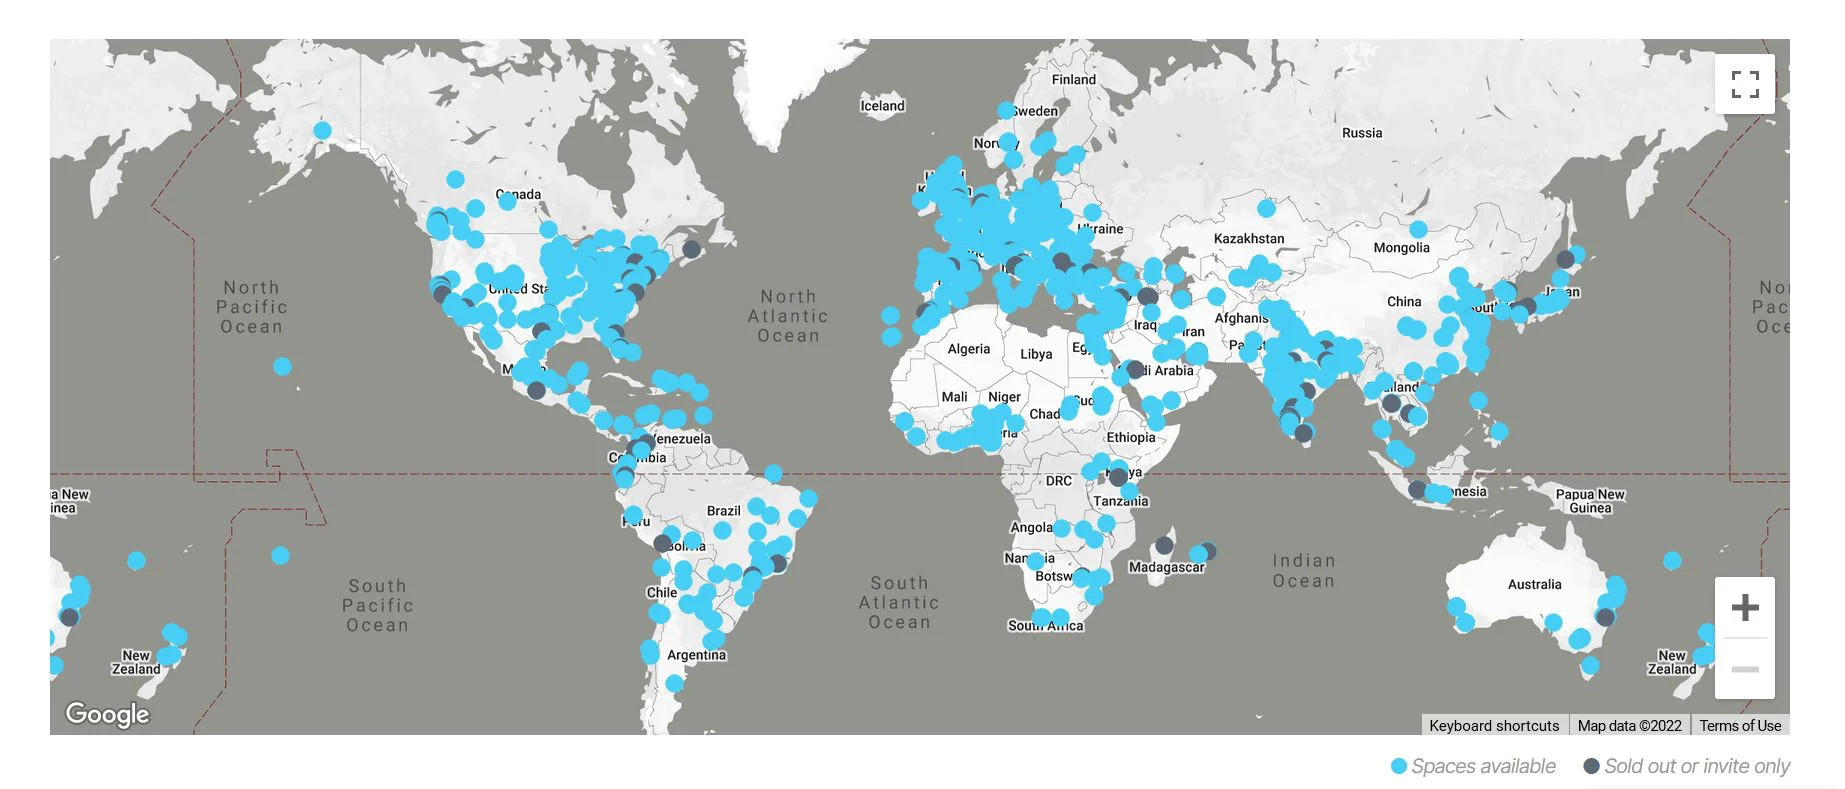 A map depicting the events organized by TED across the globe with blue and gray dots